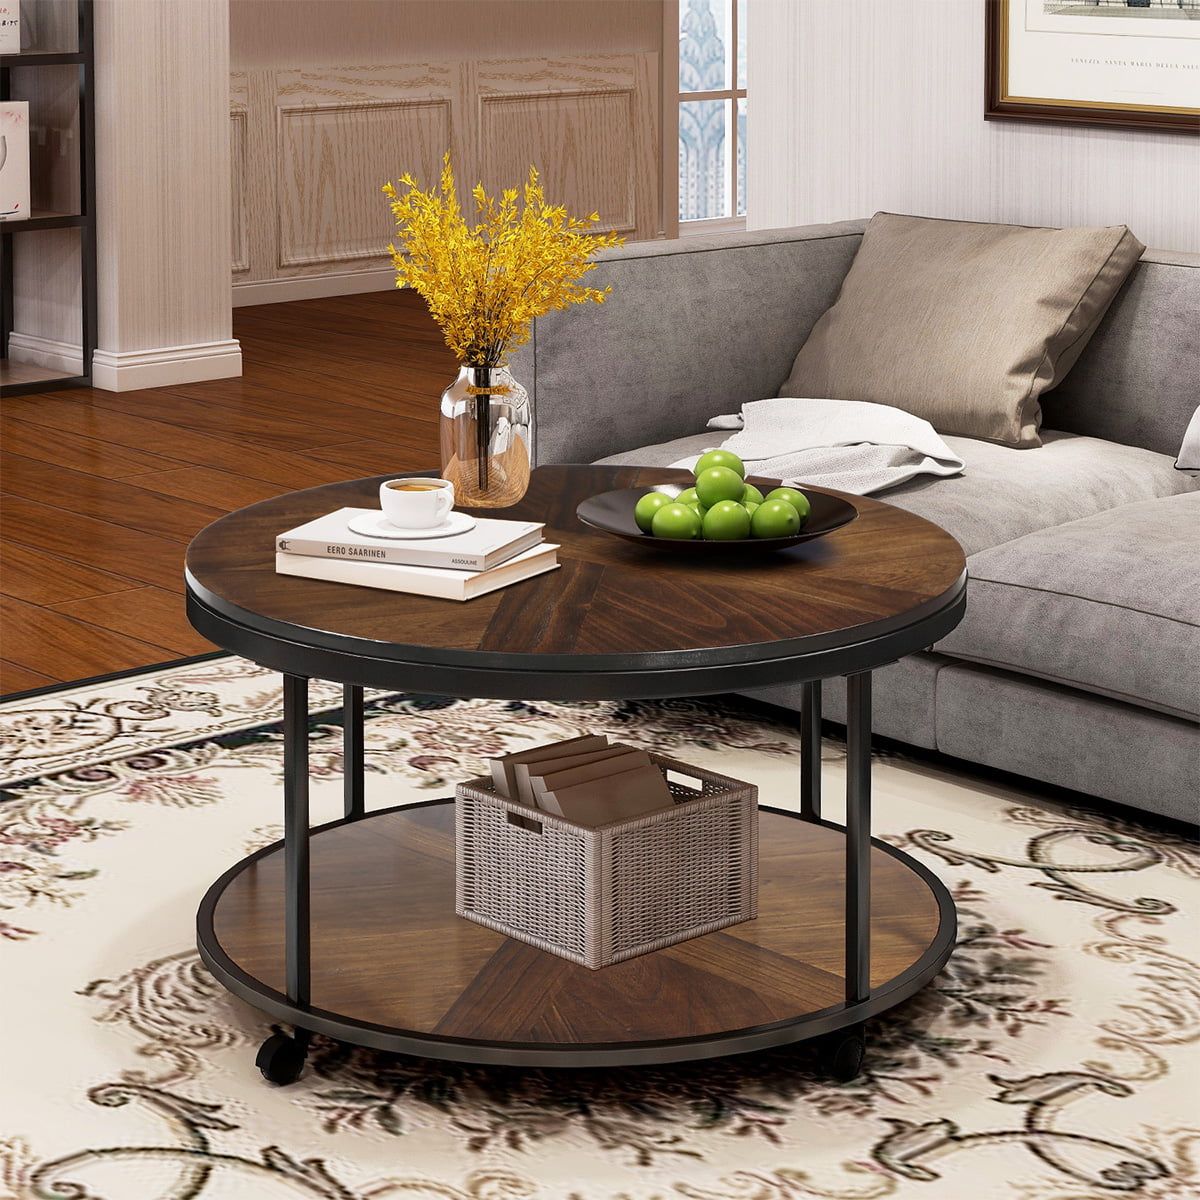 Sentern Round Coffee Table With Caster Wheels And Unique Textured Throughout Round Coffee Tables With Storage (View 9 of 20)